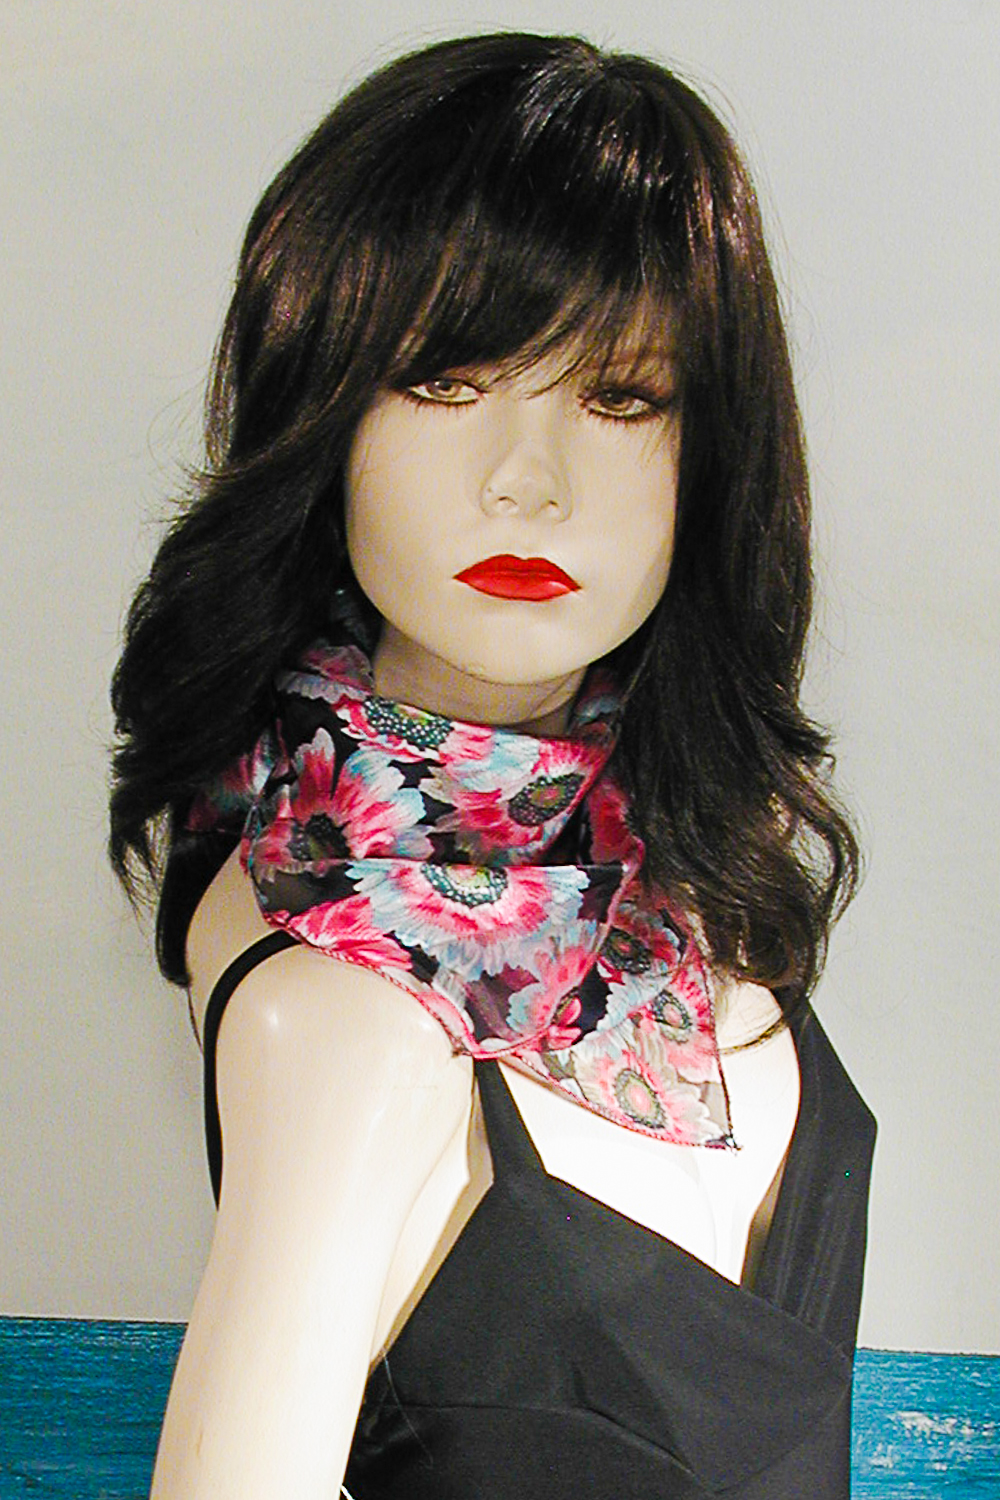 Small Square Neck Scarf with Red Flowers, a fashion accessorie - Evening Elegance